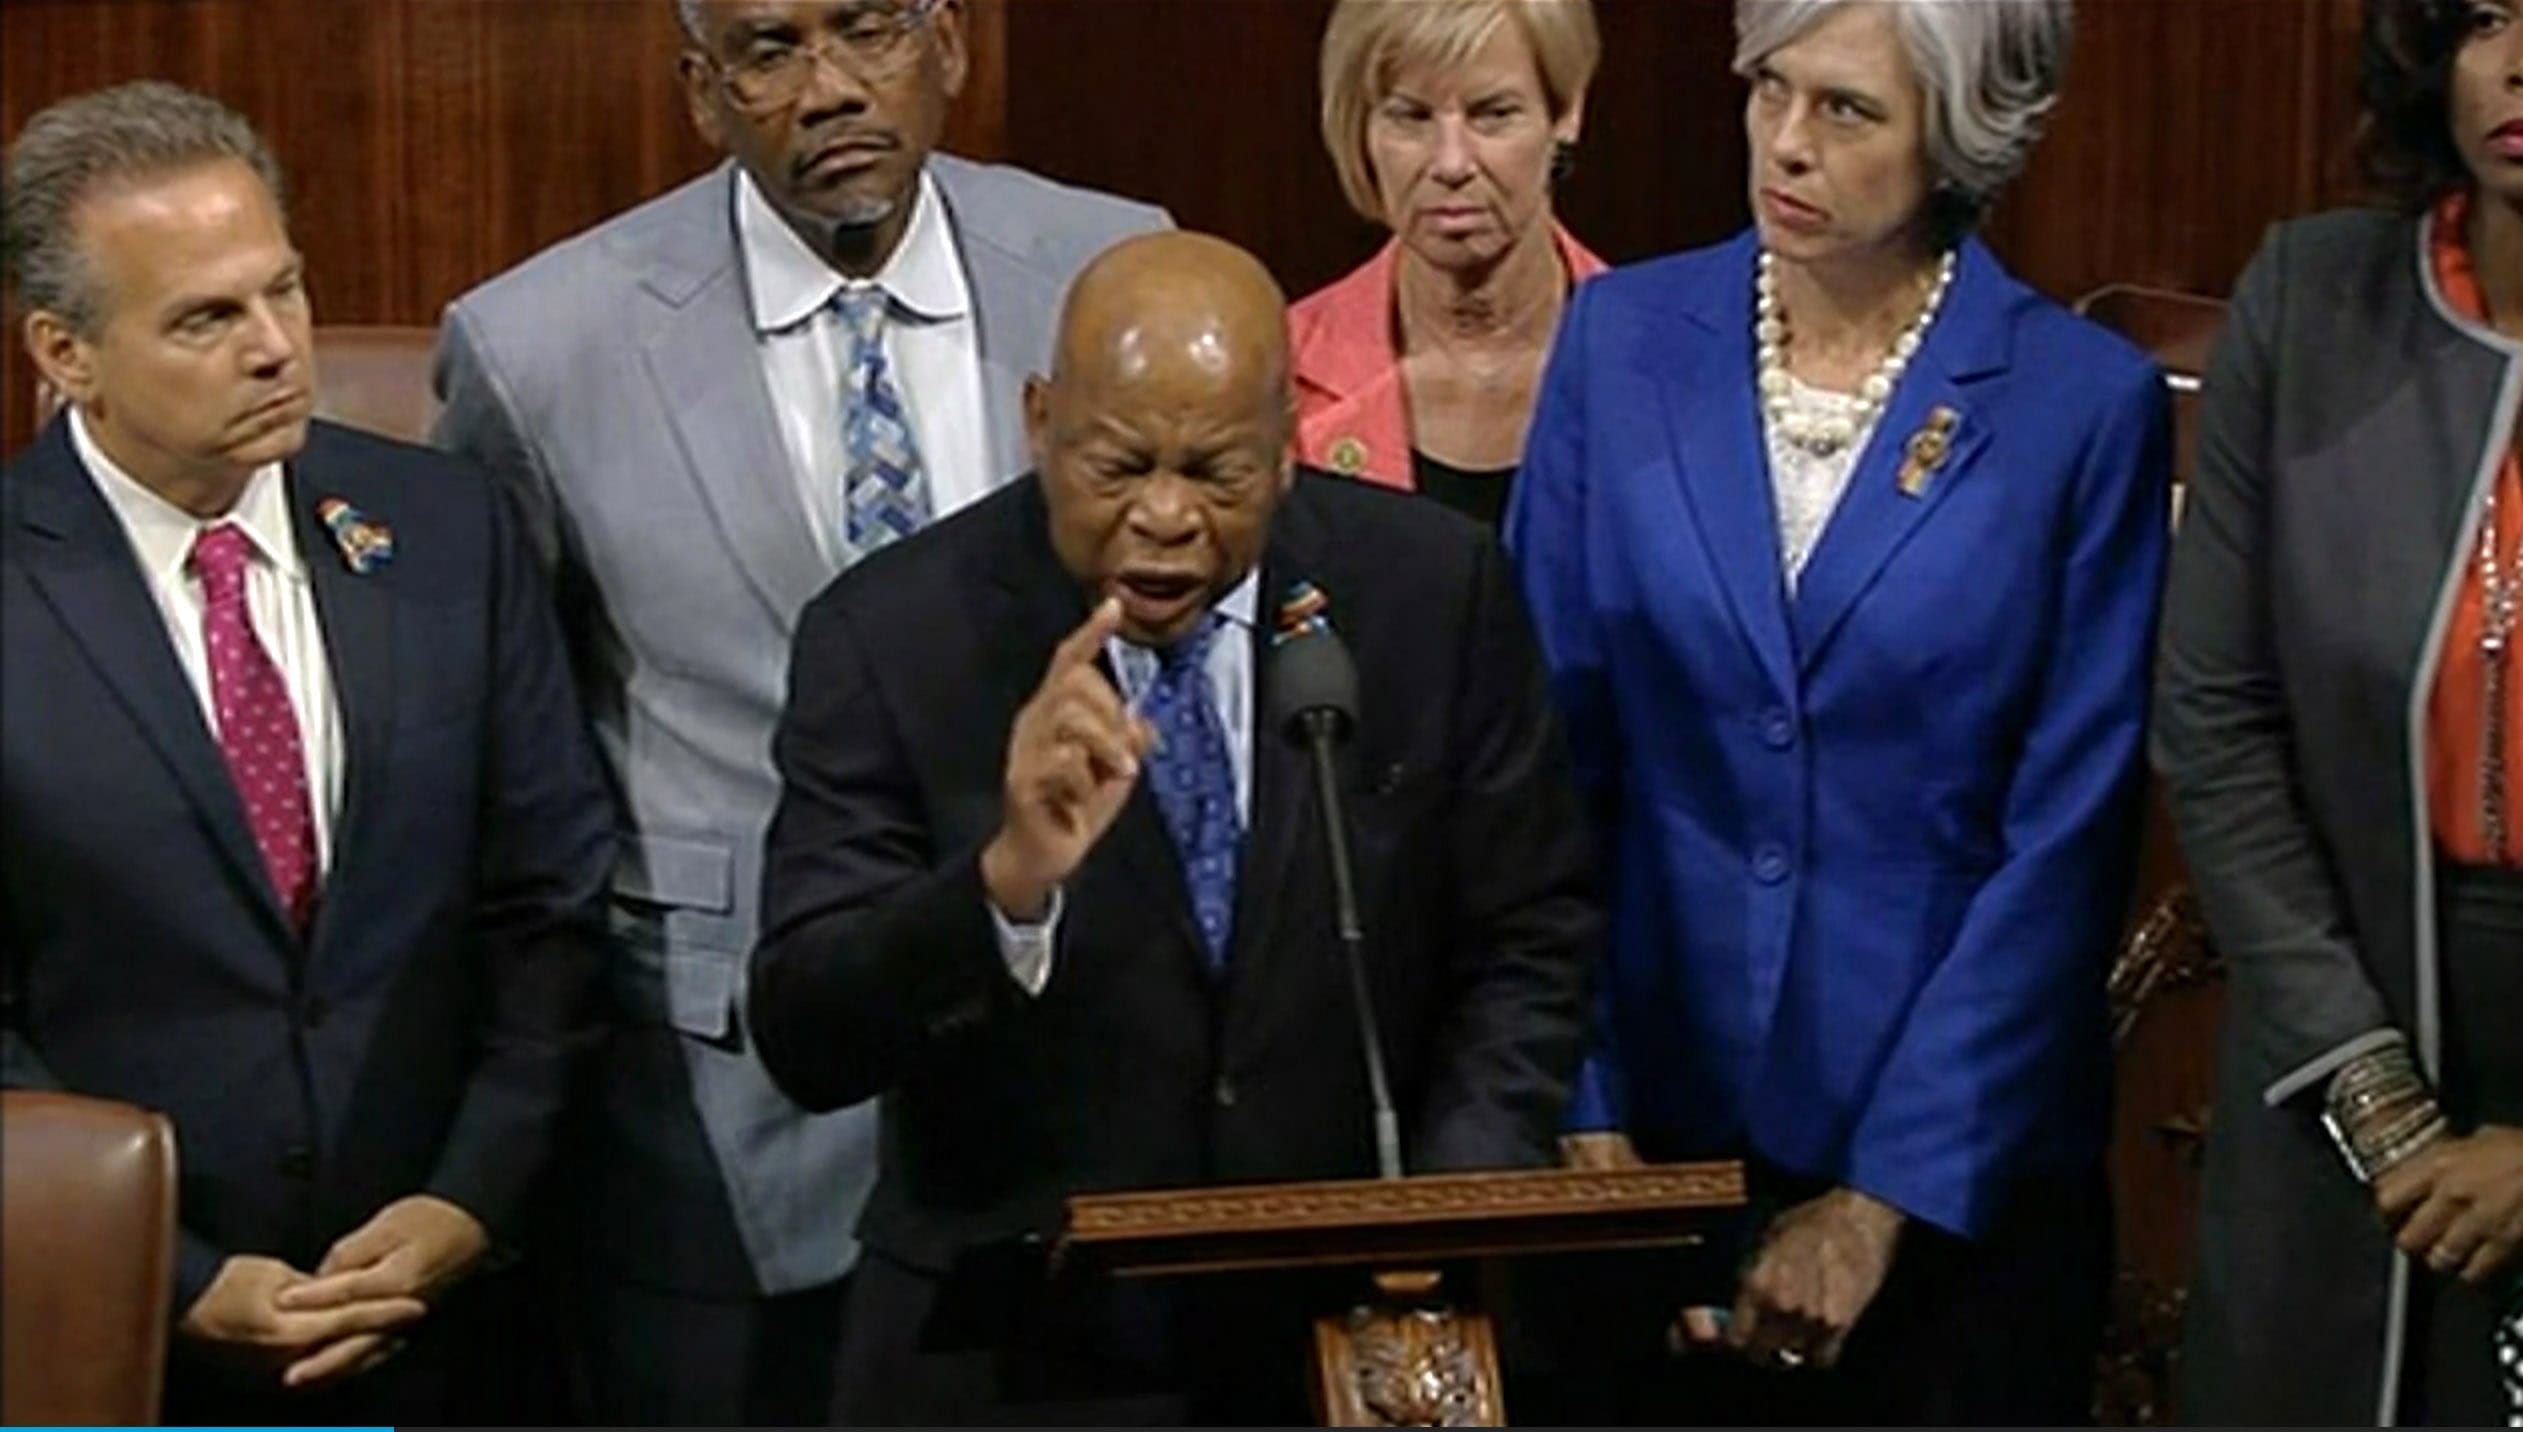 In this frame grab taken from AP video Georgia Rep. John Lewis leads more than 200 Democrats in demanding a vote on measures to expand background checks and block gun purchases by some suspected terrorists in the aftermath of last week's massacre in Orlando, Florida, that killed 49 people in a gay nightclub.  Rebellious Democrats shut down the House's legislative work on Wednesday, June 22, 2016, staging a sit-in on the House floor and refusing to leave until they secured a vote on gun control measures before lawmakers' weeklong break.